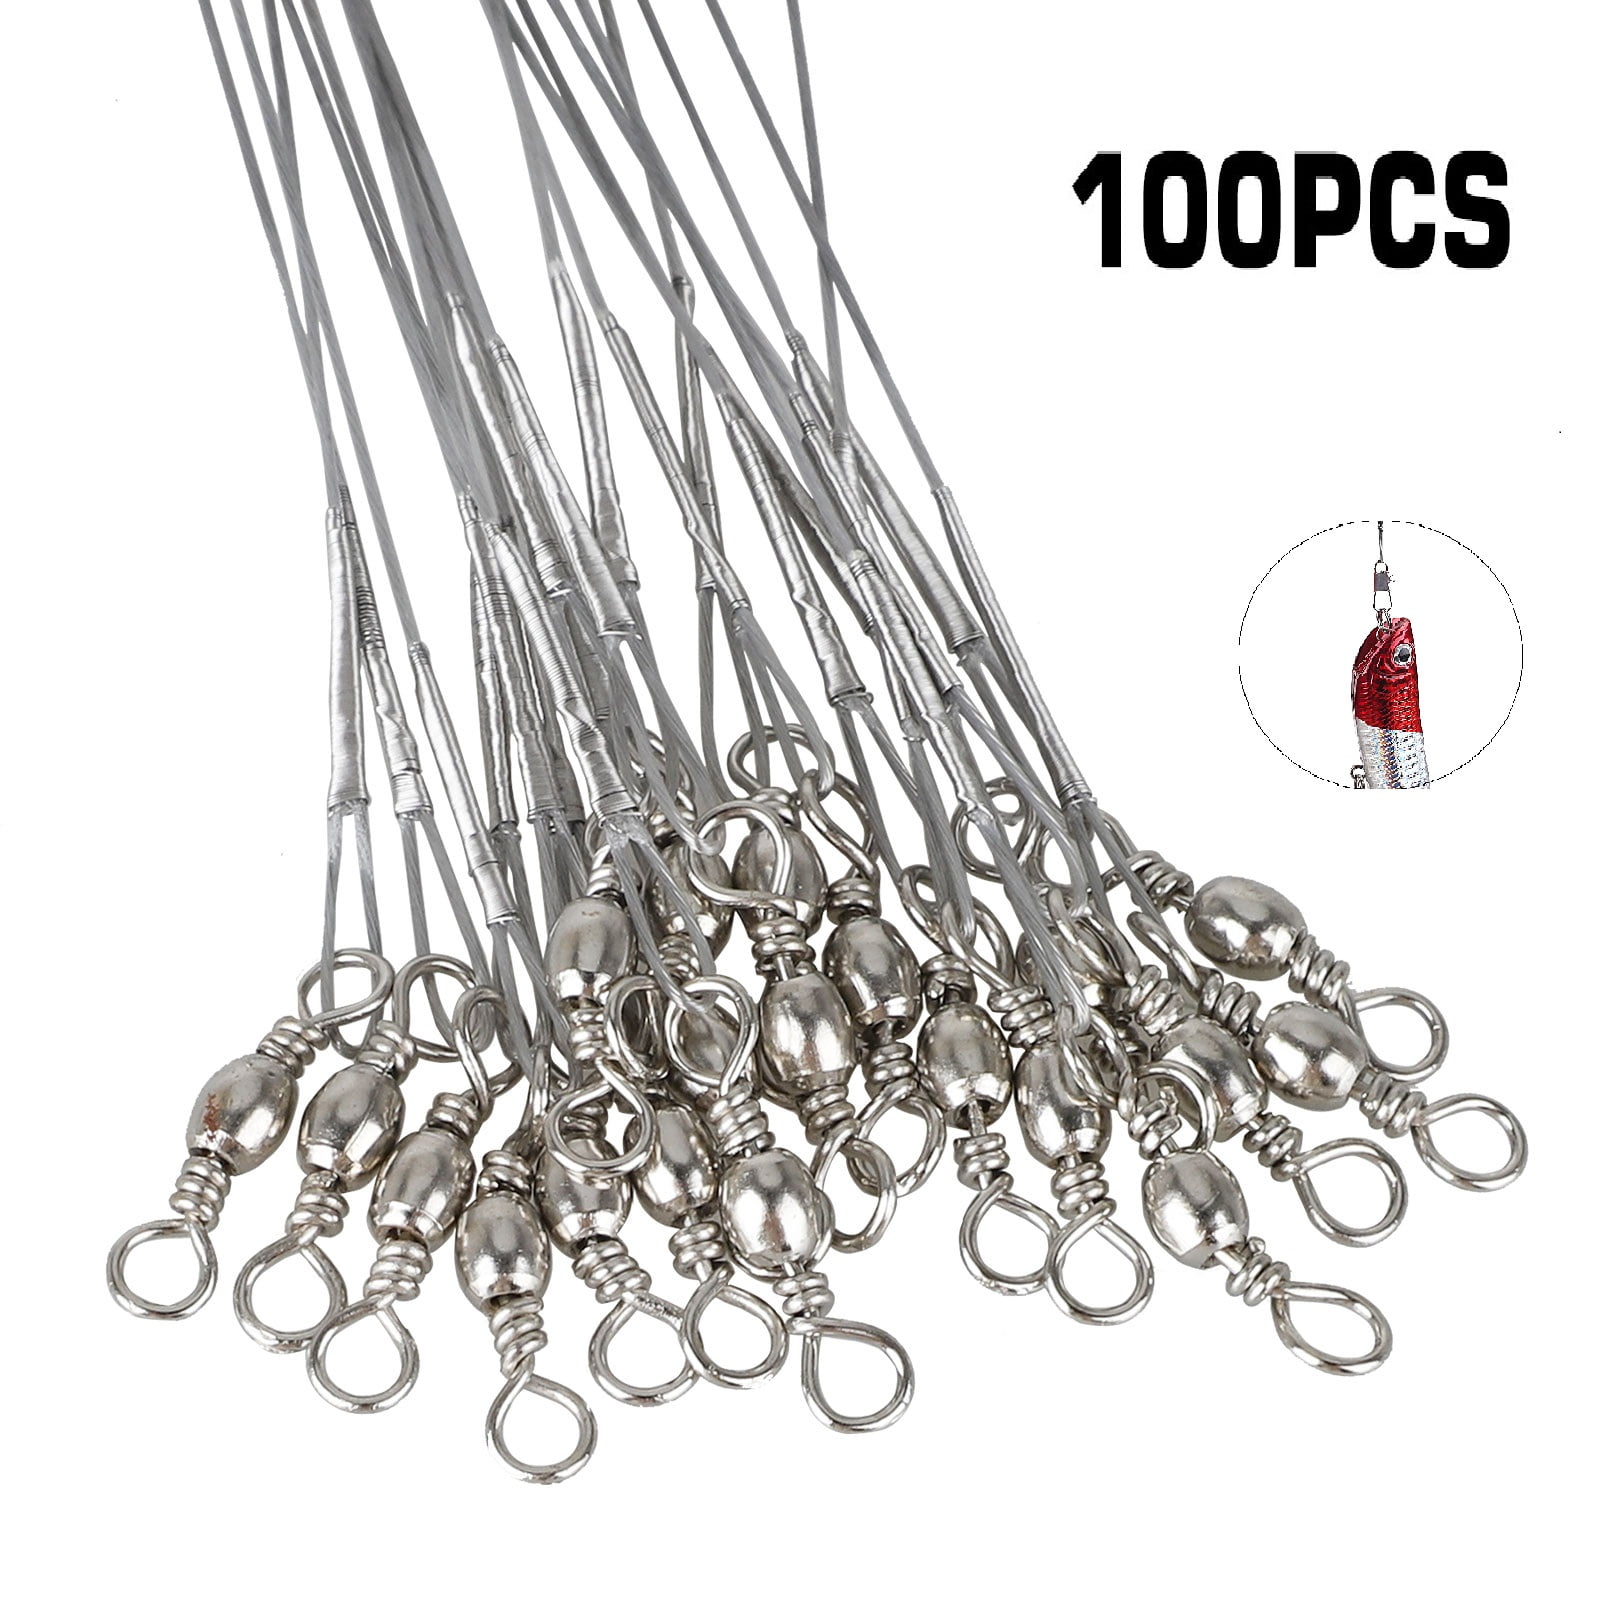 72x Fishing Trace Lure Leader Stainless Steel Wire Spinner Swivel Line 